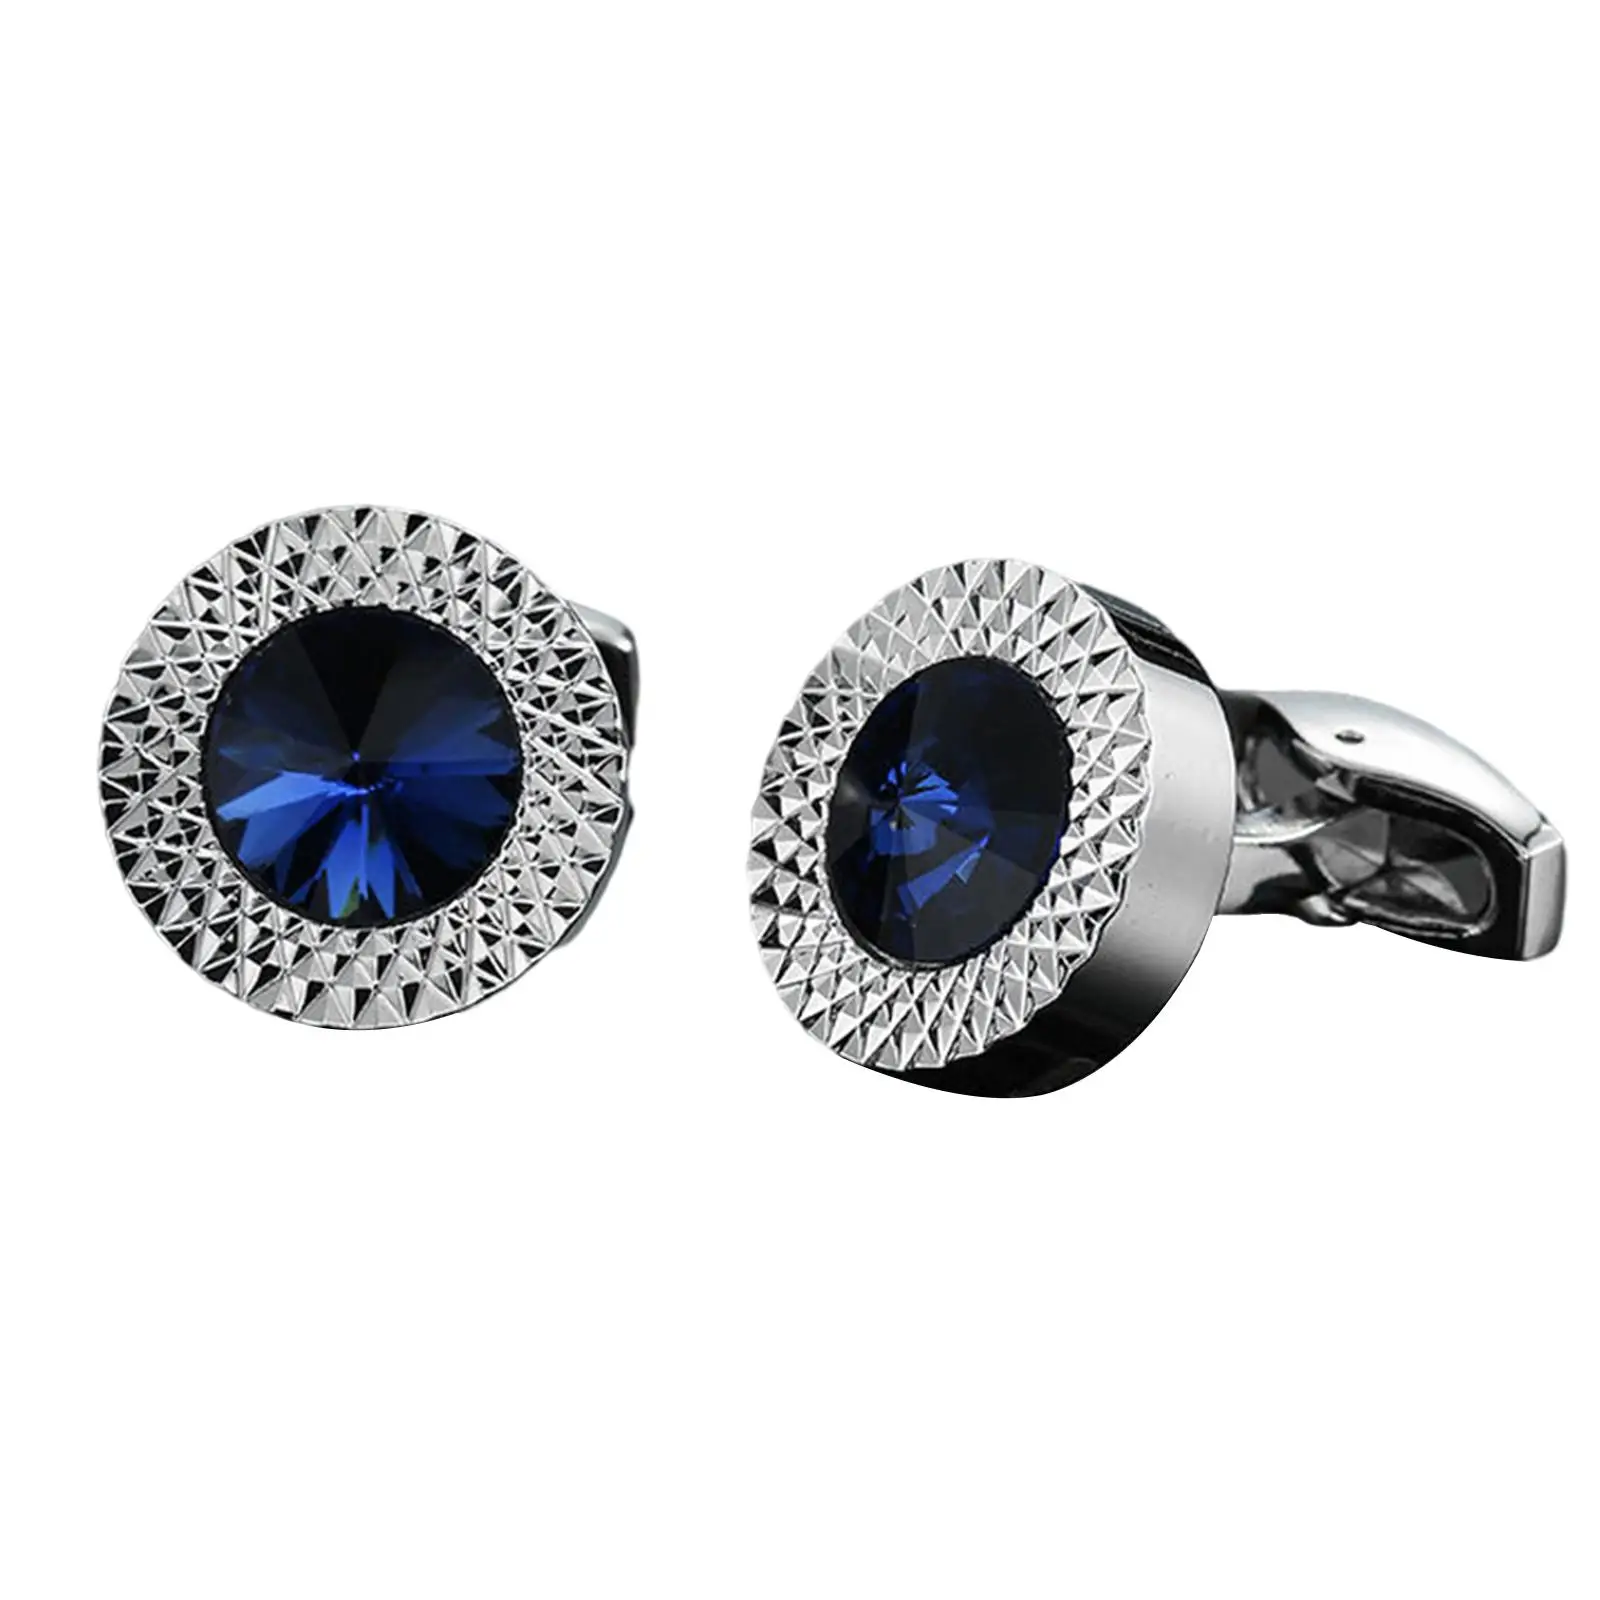 2x Elegant Cuff Links Simply Shirt Fashion Decor Buttons Jewelry for Party Gift Wedding